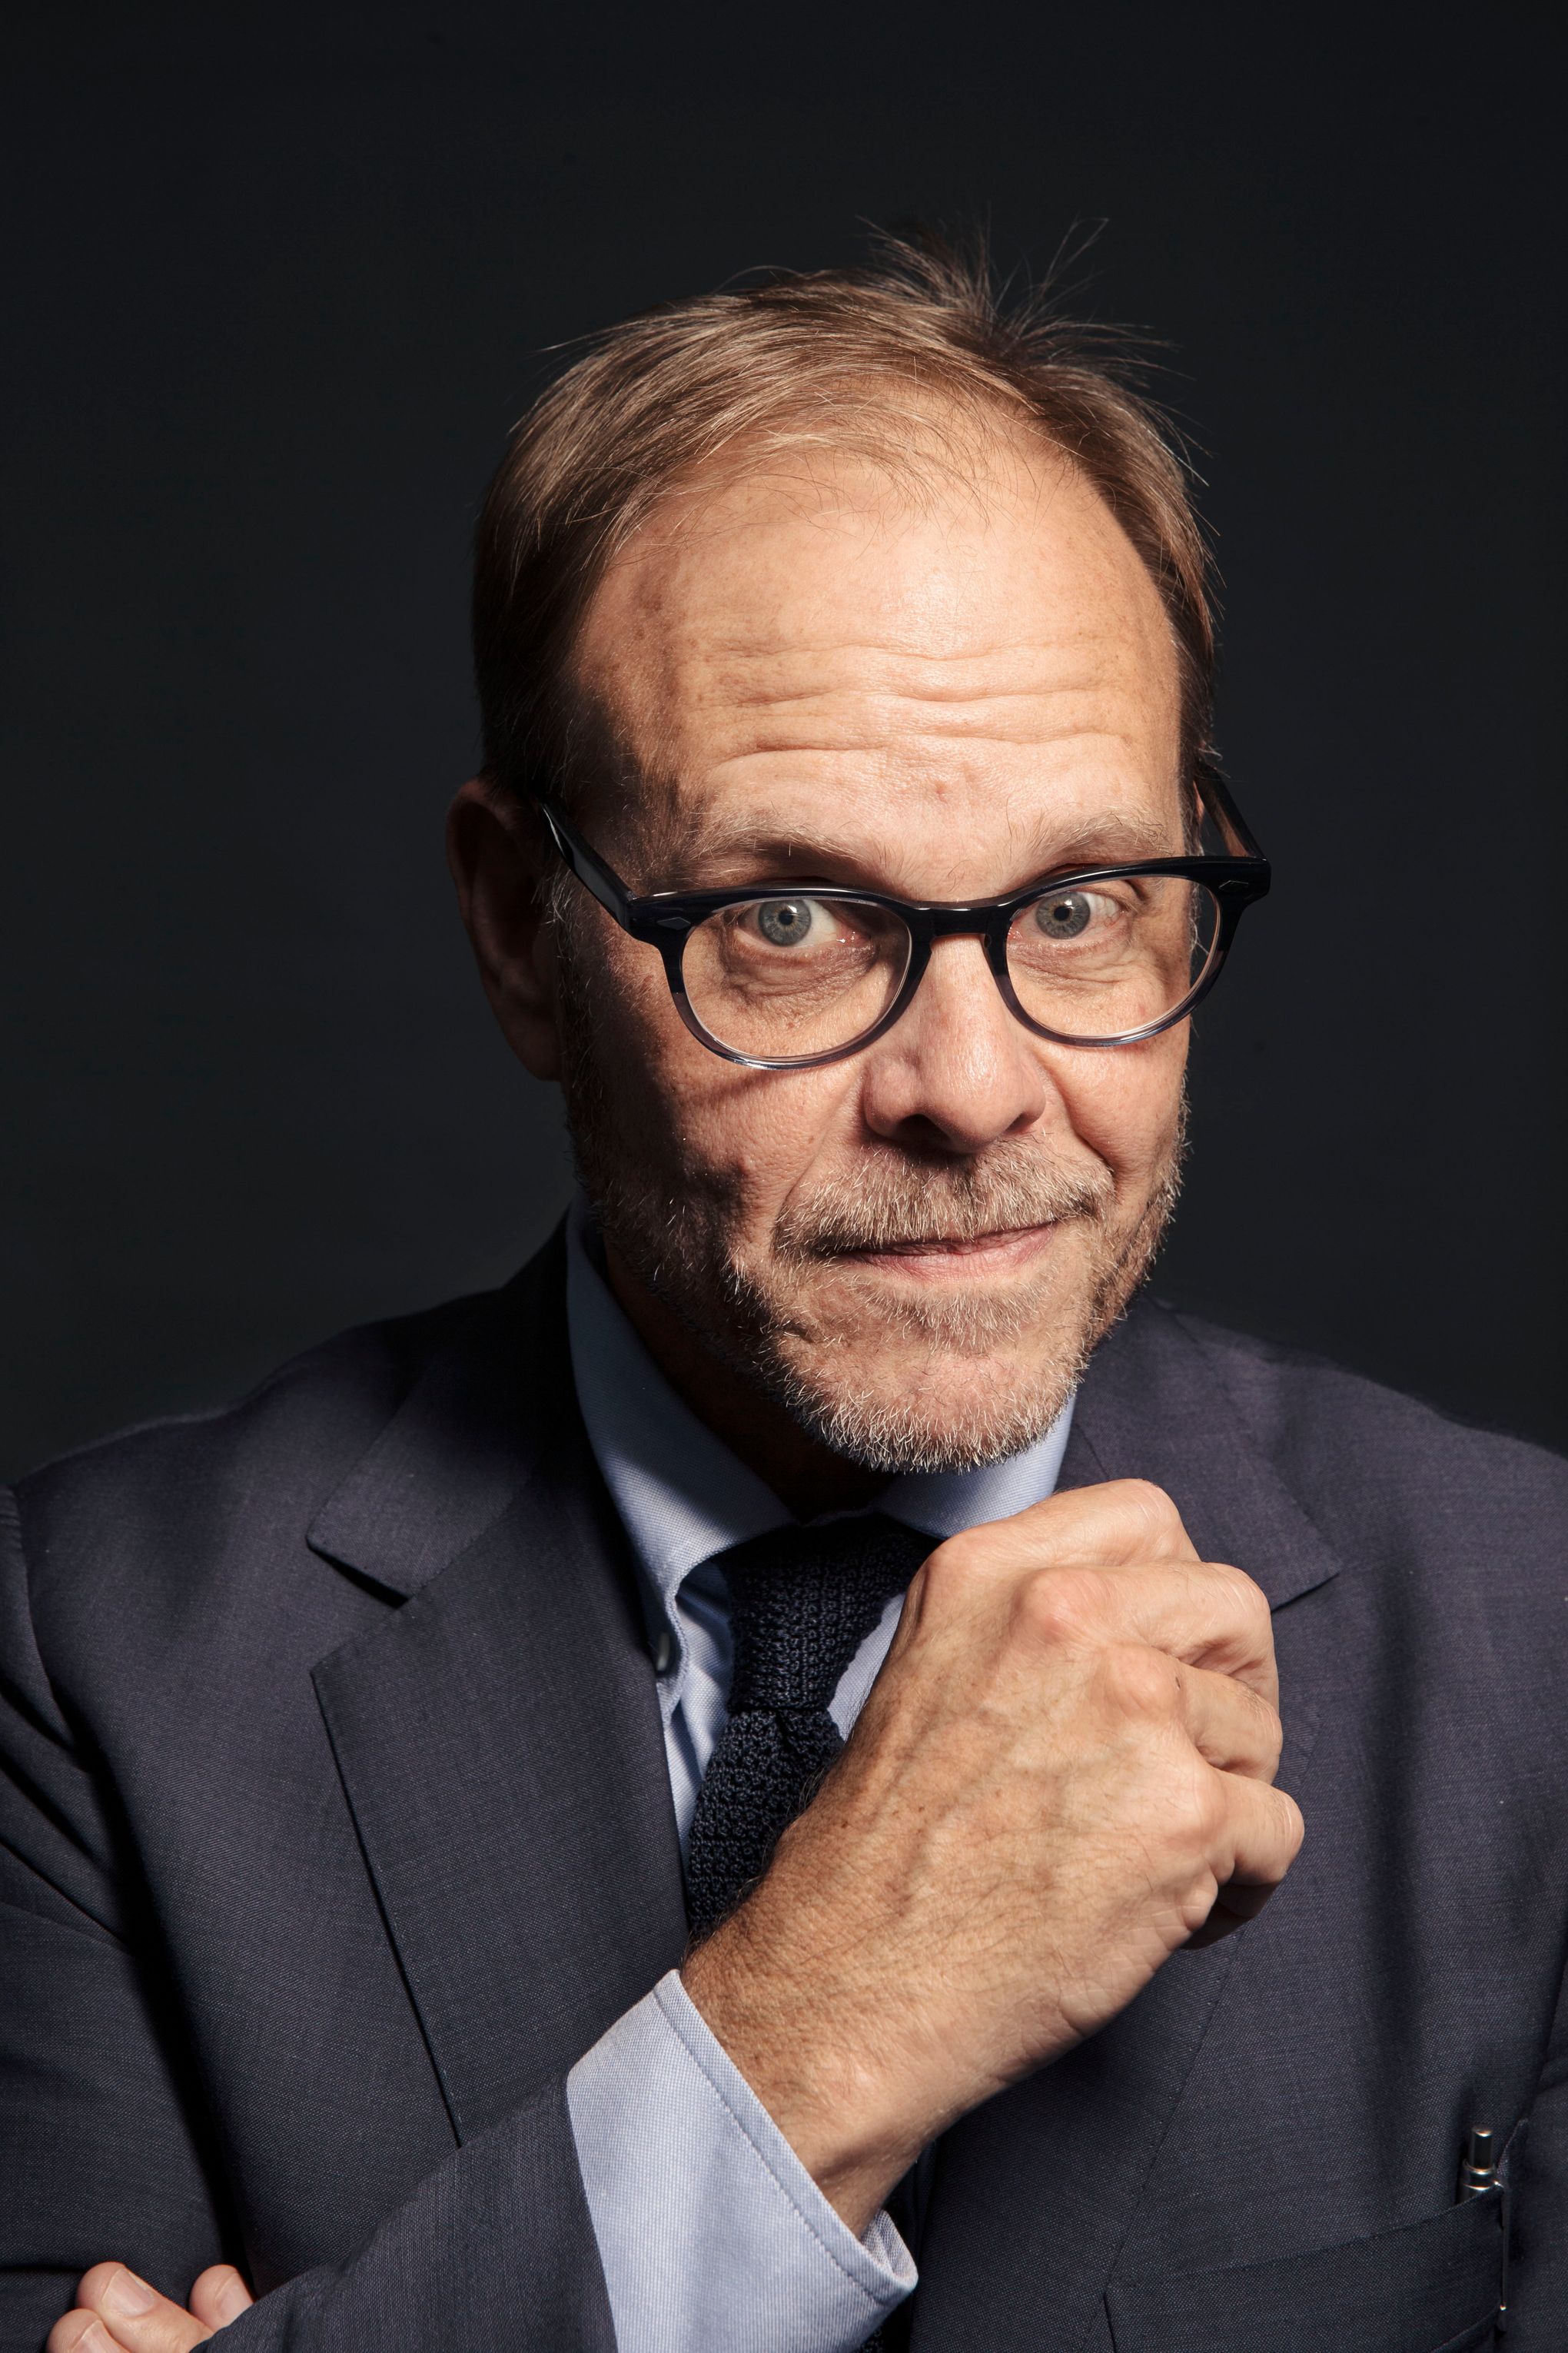 Things You Don't Know About Alton Brown - Good Eats Facts 